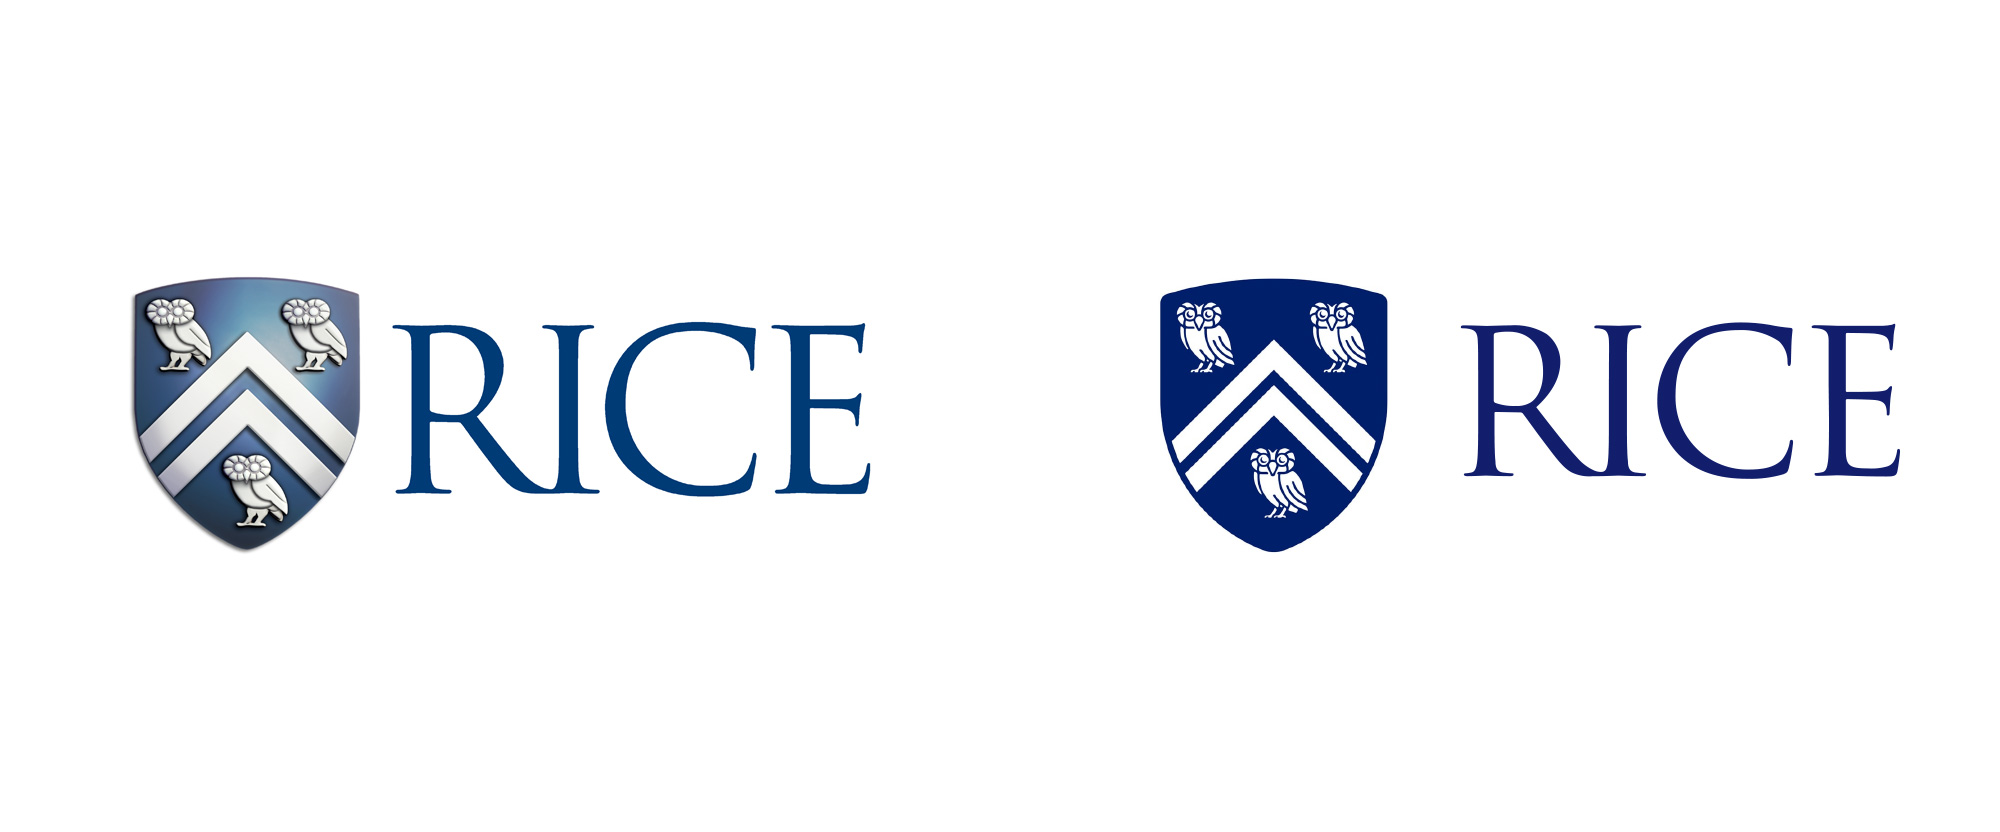 New Logo and Identity for Rice University by Hawkeye